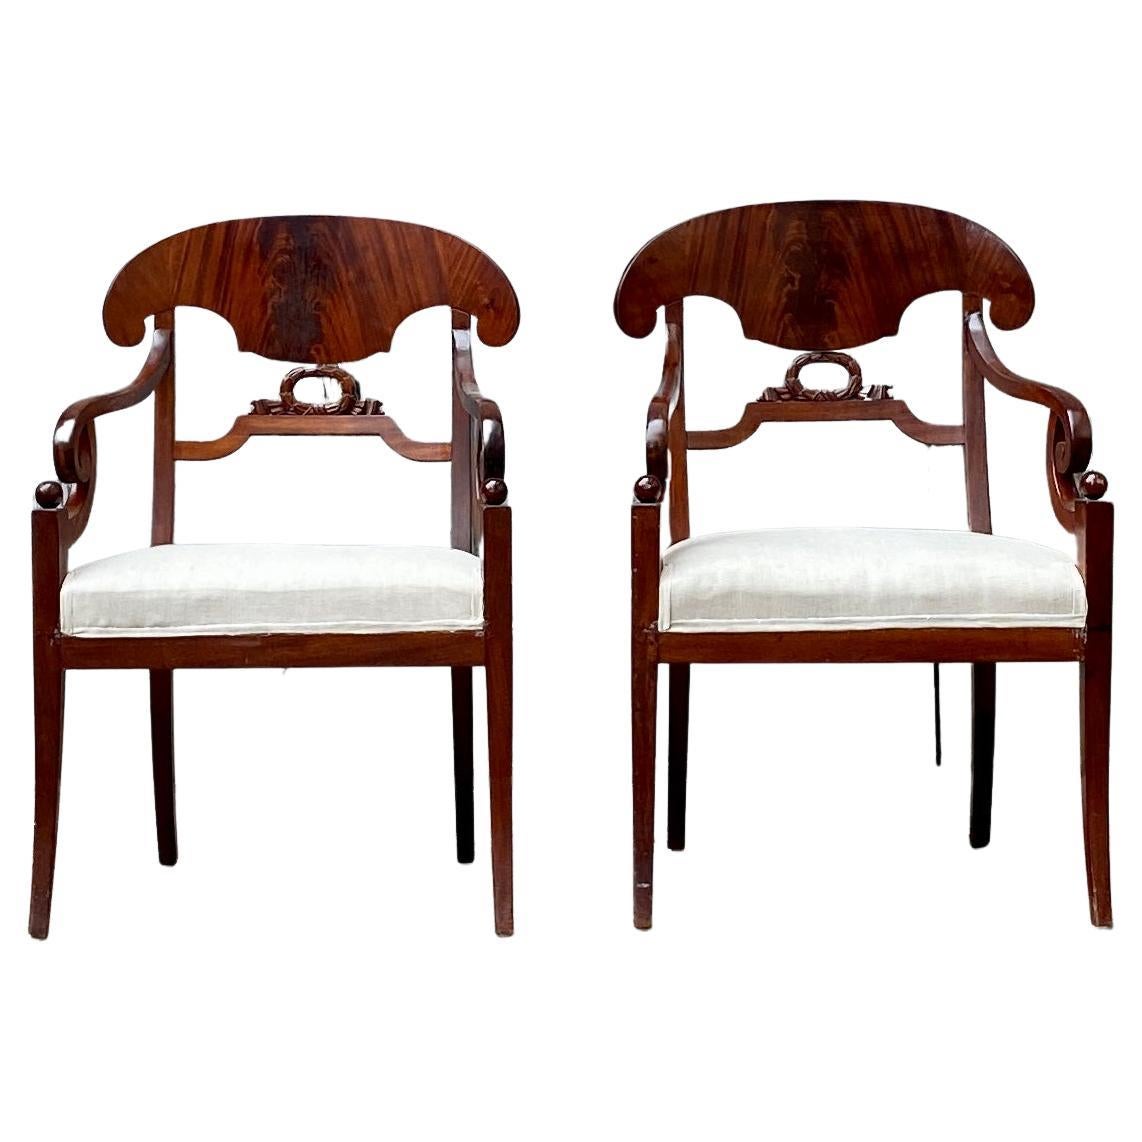 Pair of Swedish Empire Mahogany Armchairs 19th Century Sweden For Sale